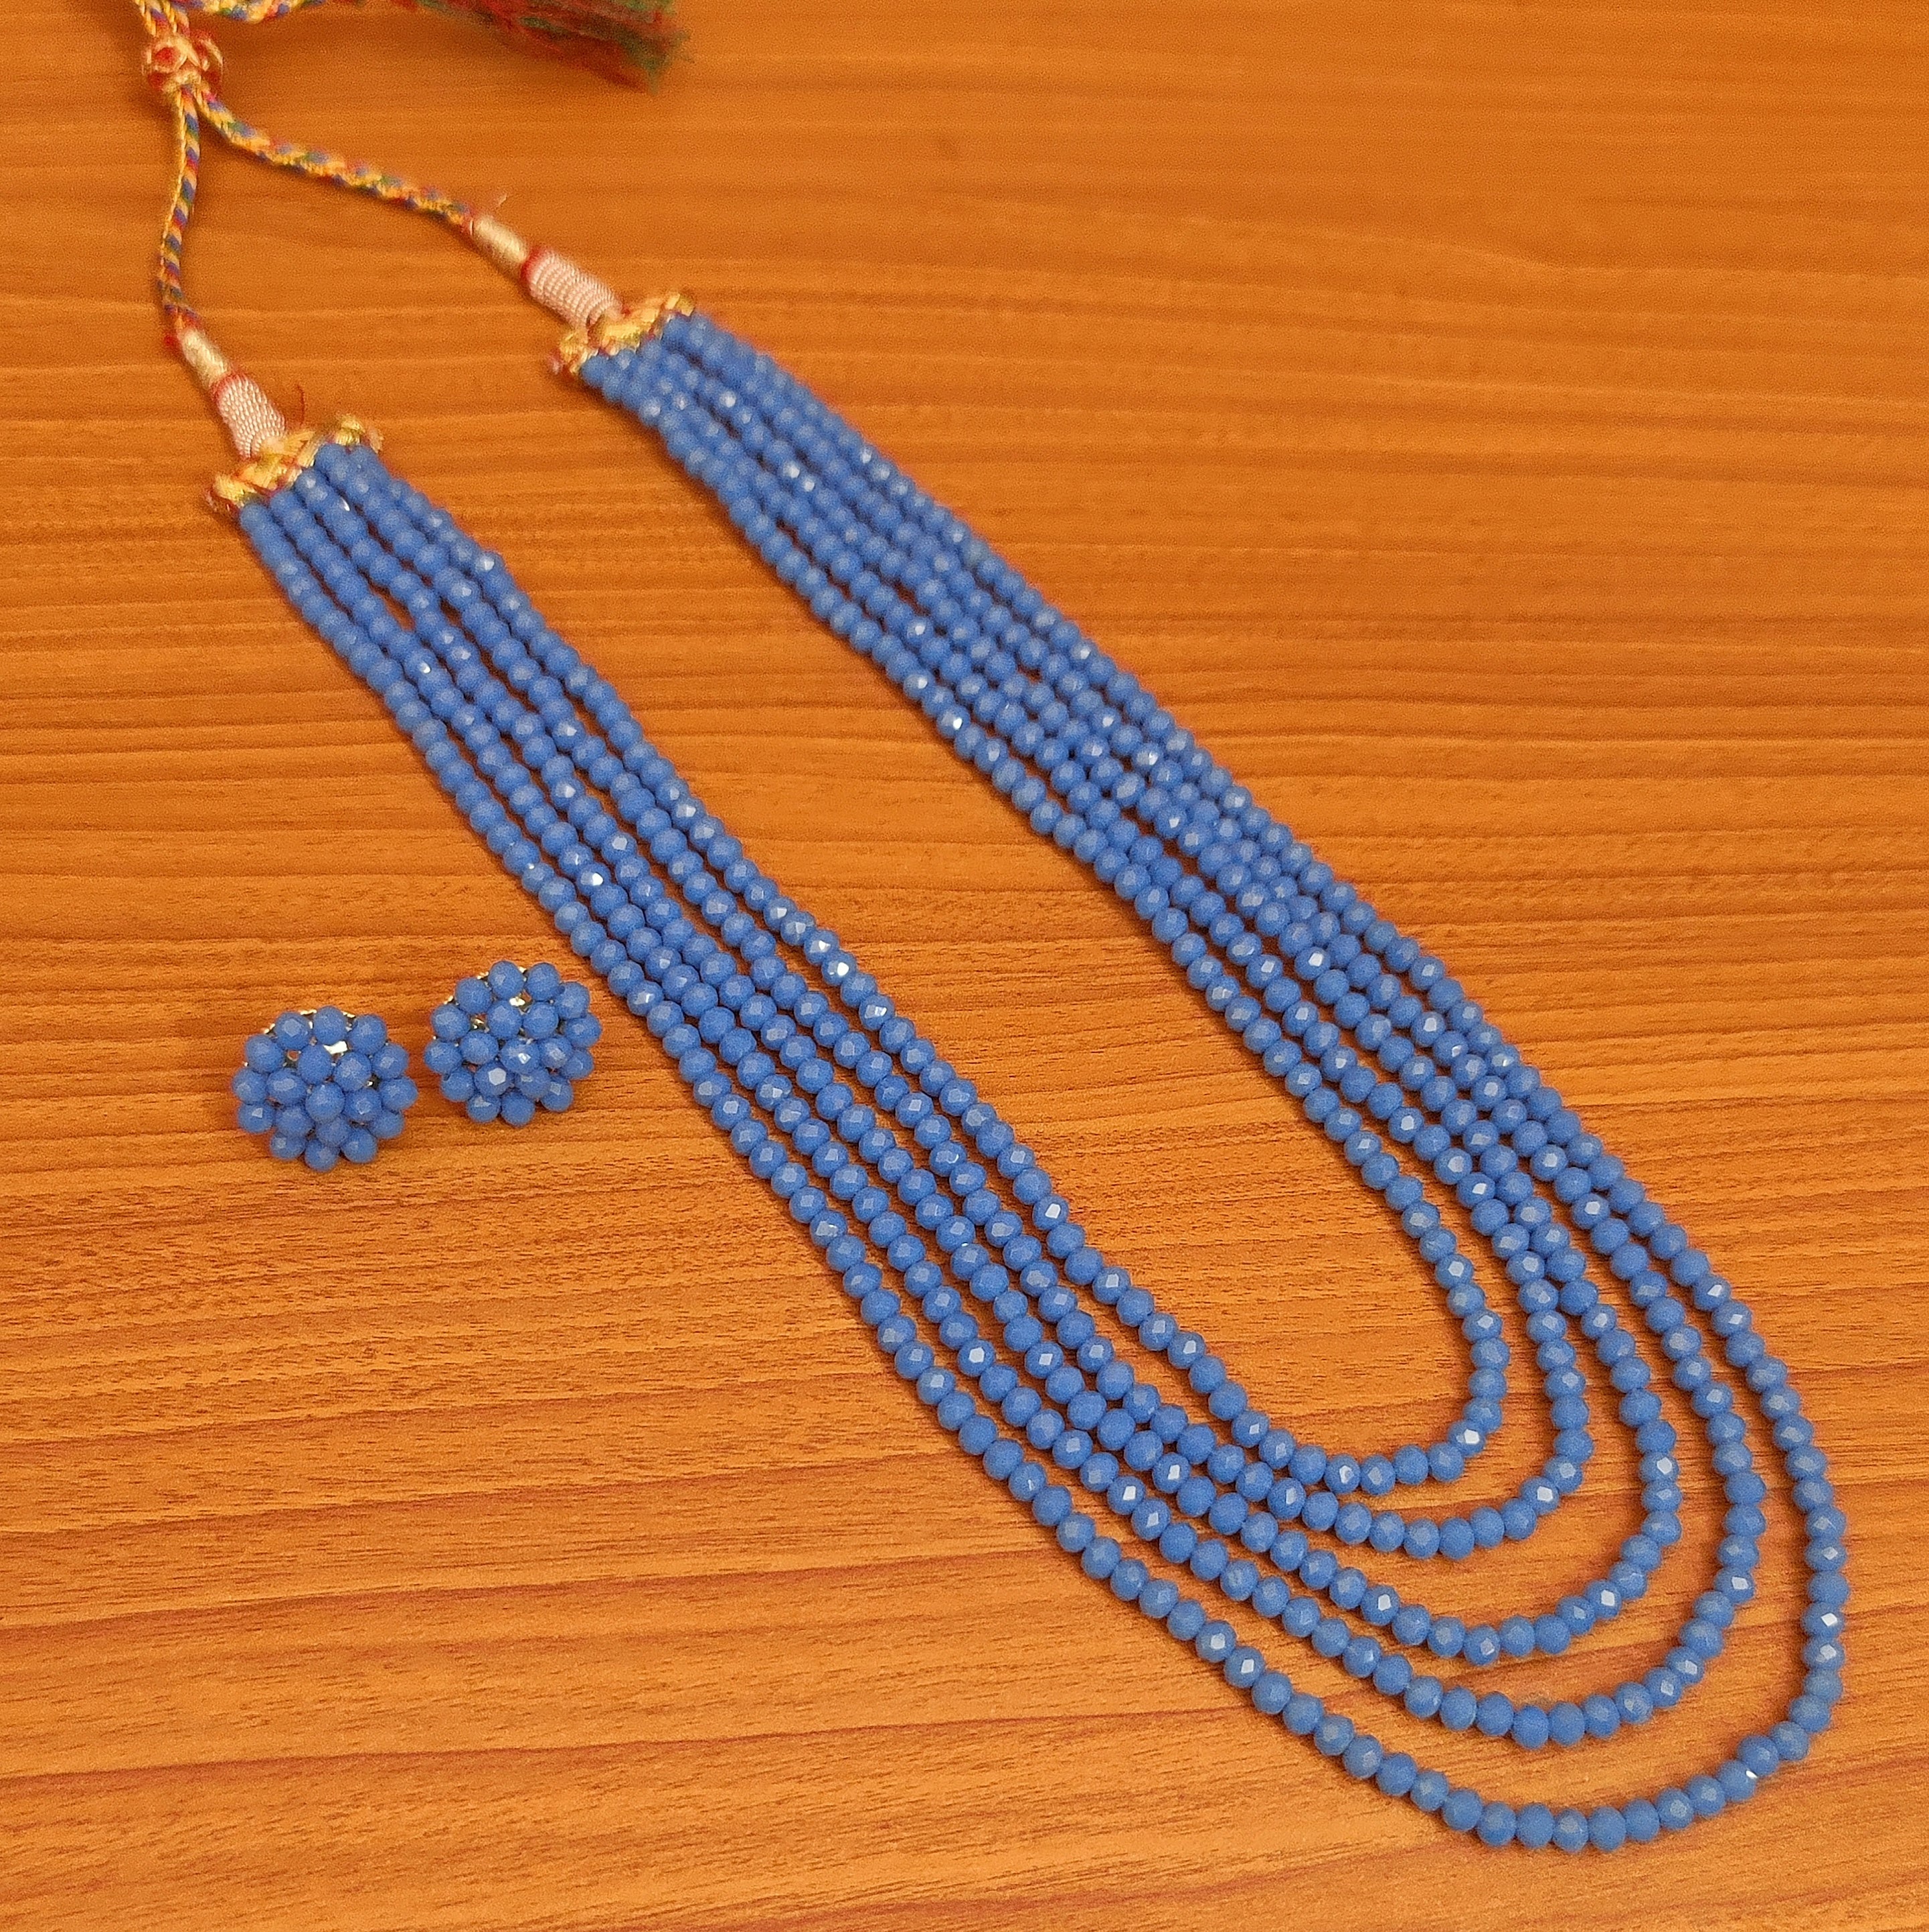 Kundan Pendant and strings of Blue beads Necklace with Earrings Set